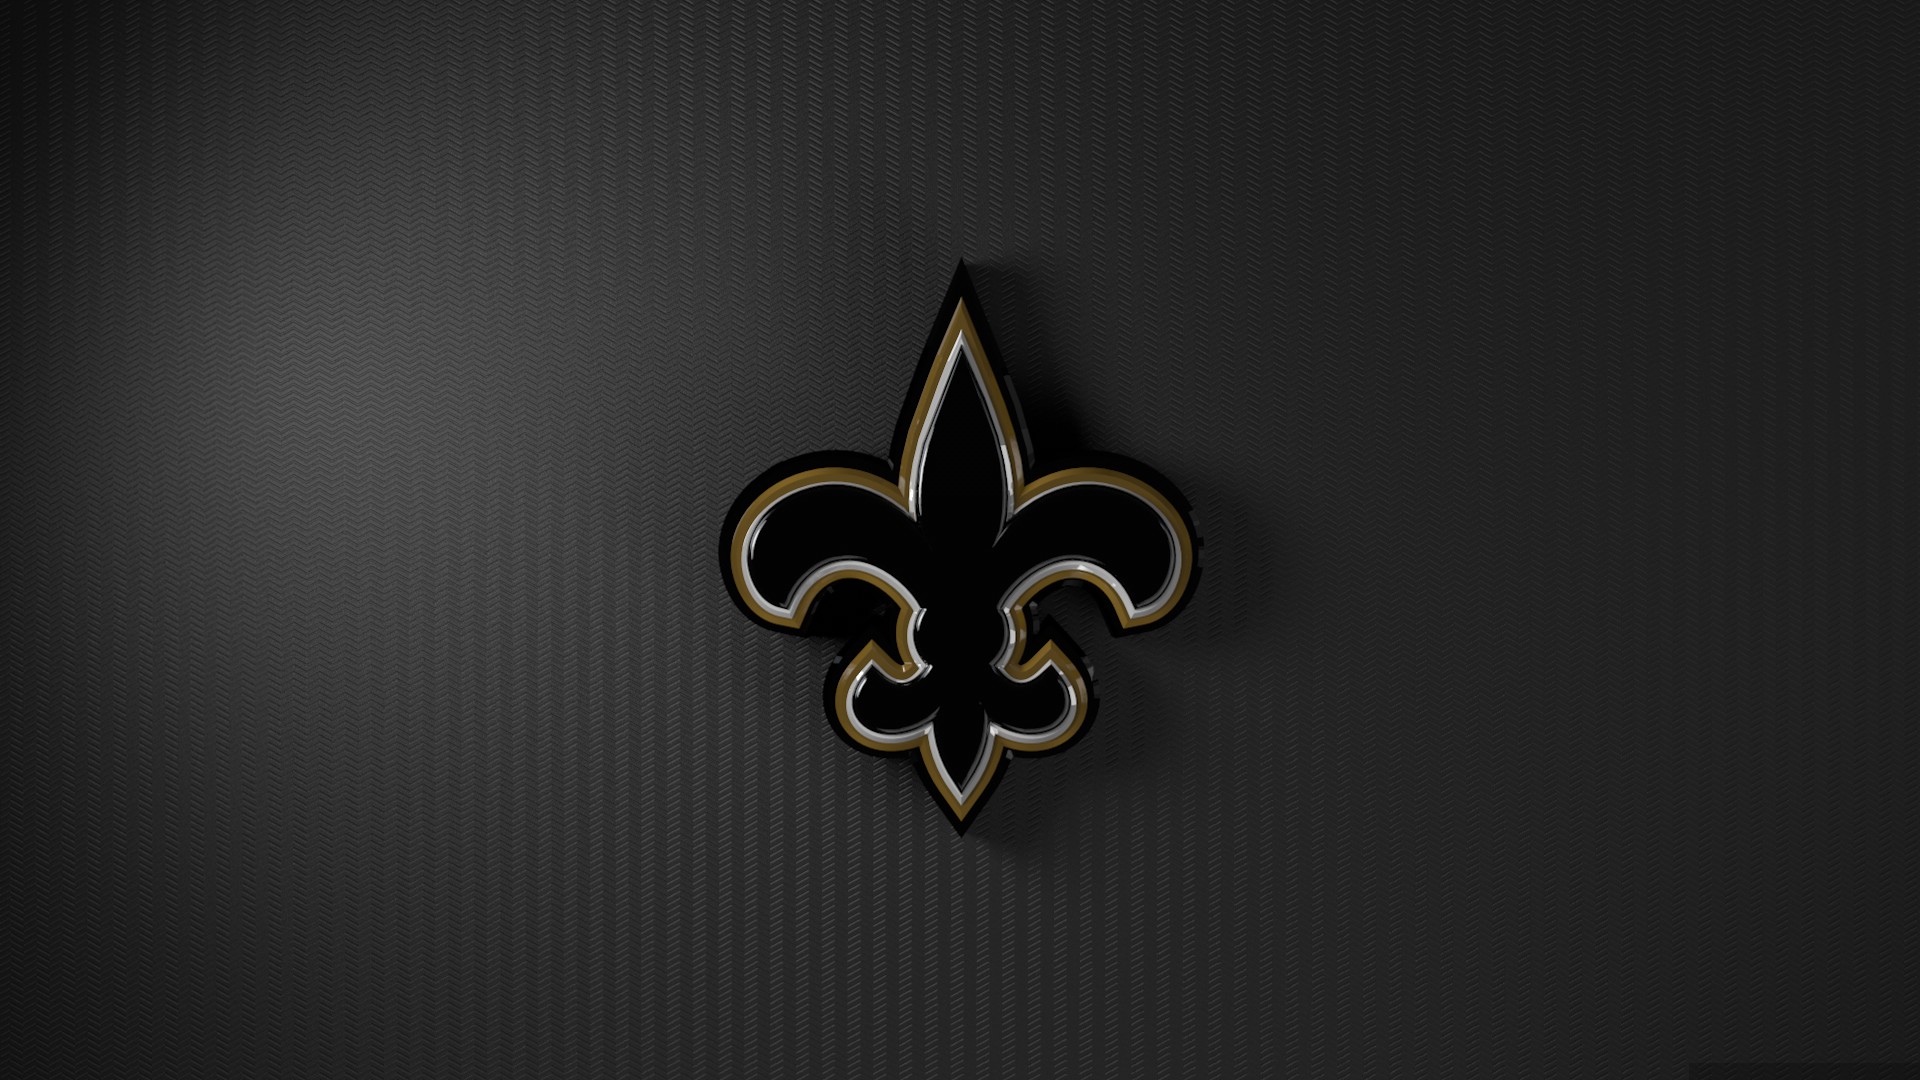 New Orleans Saints Desktop Wallpaper With Resolution 1920X1080 pixel. You can make this wallpaper for your Mac or Windows Desktop Background, iPhone, Android or Tablet and another Smartphone device for free